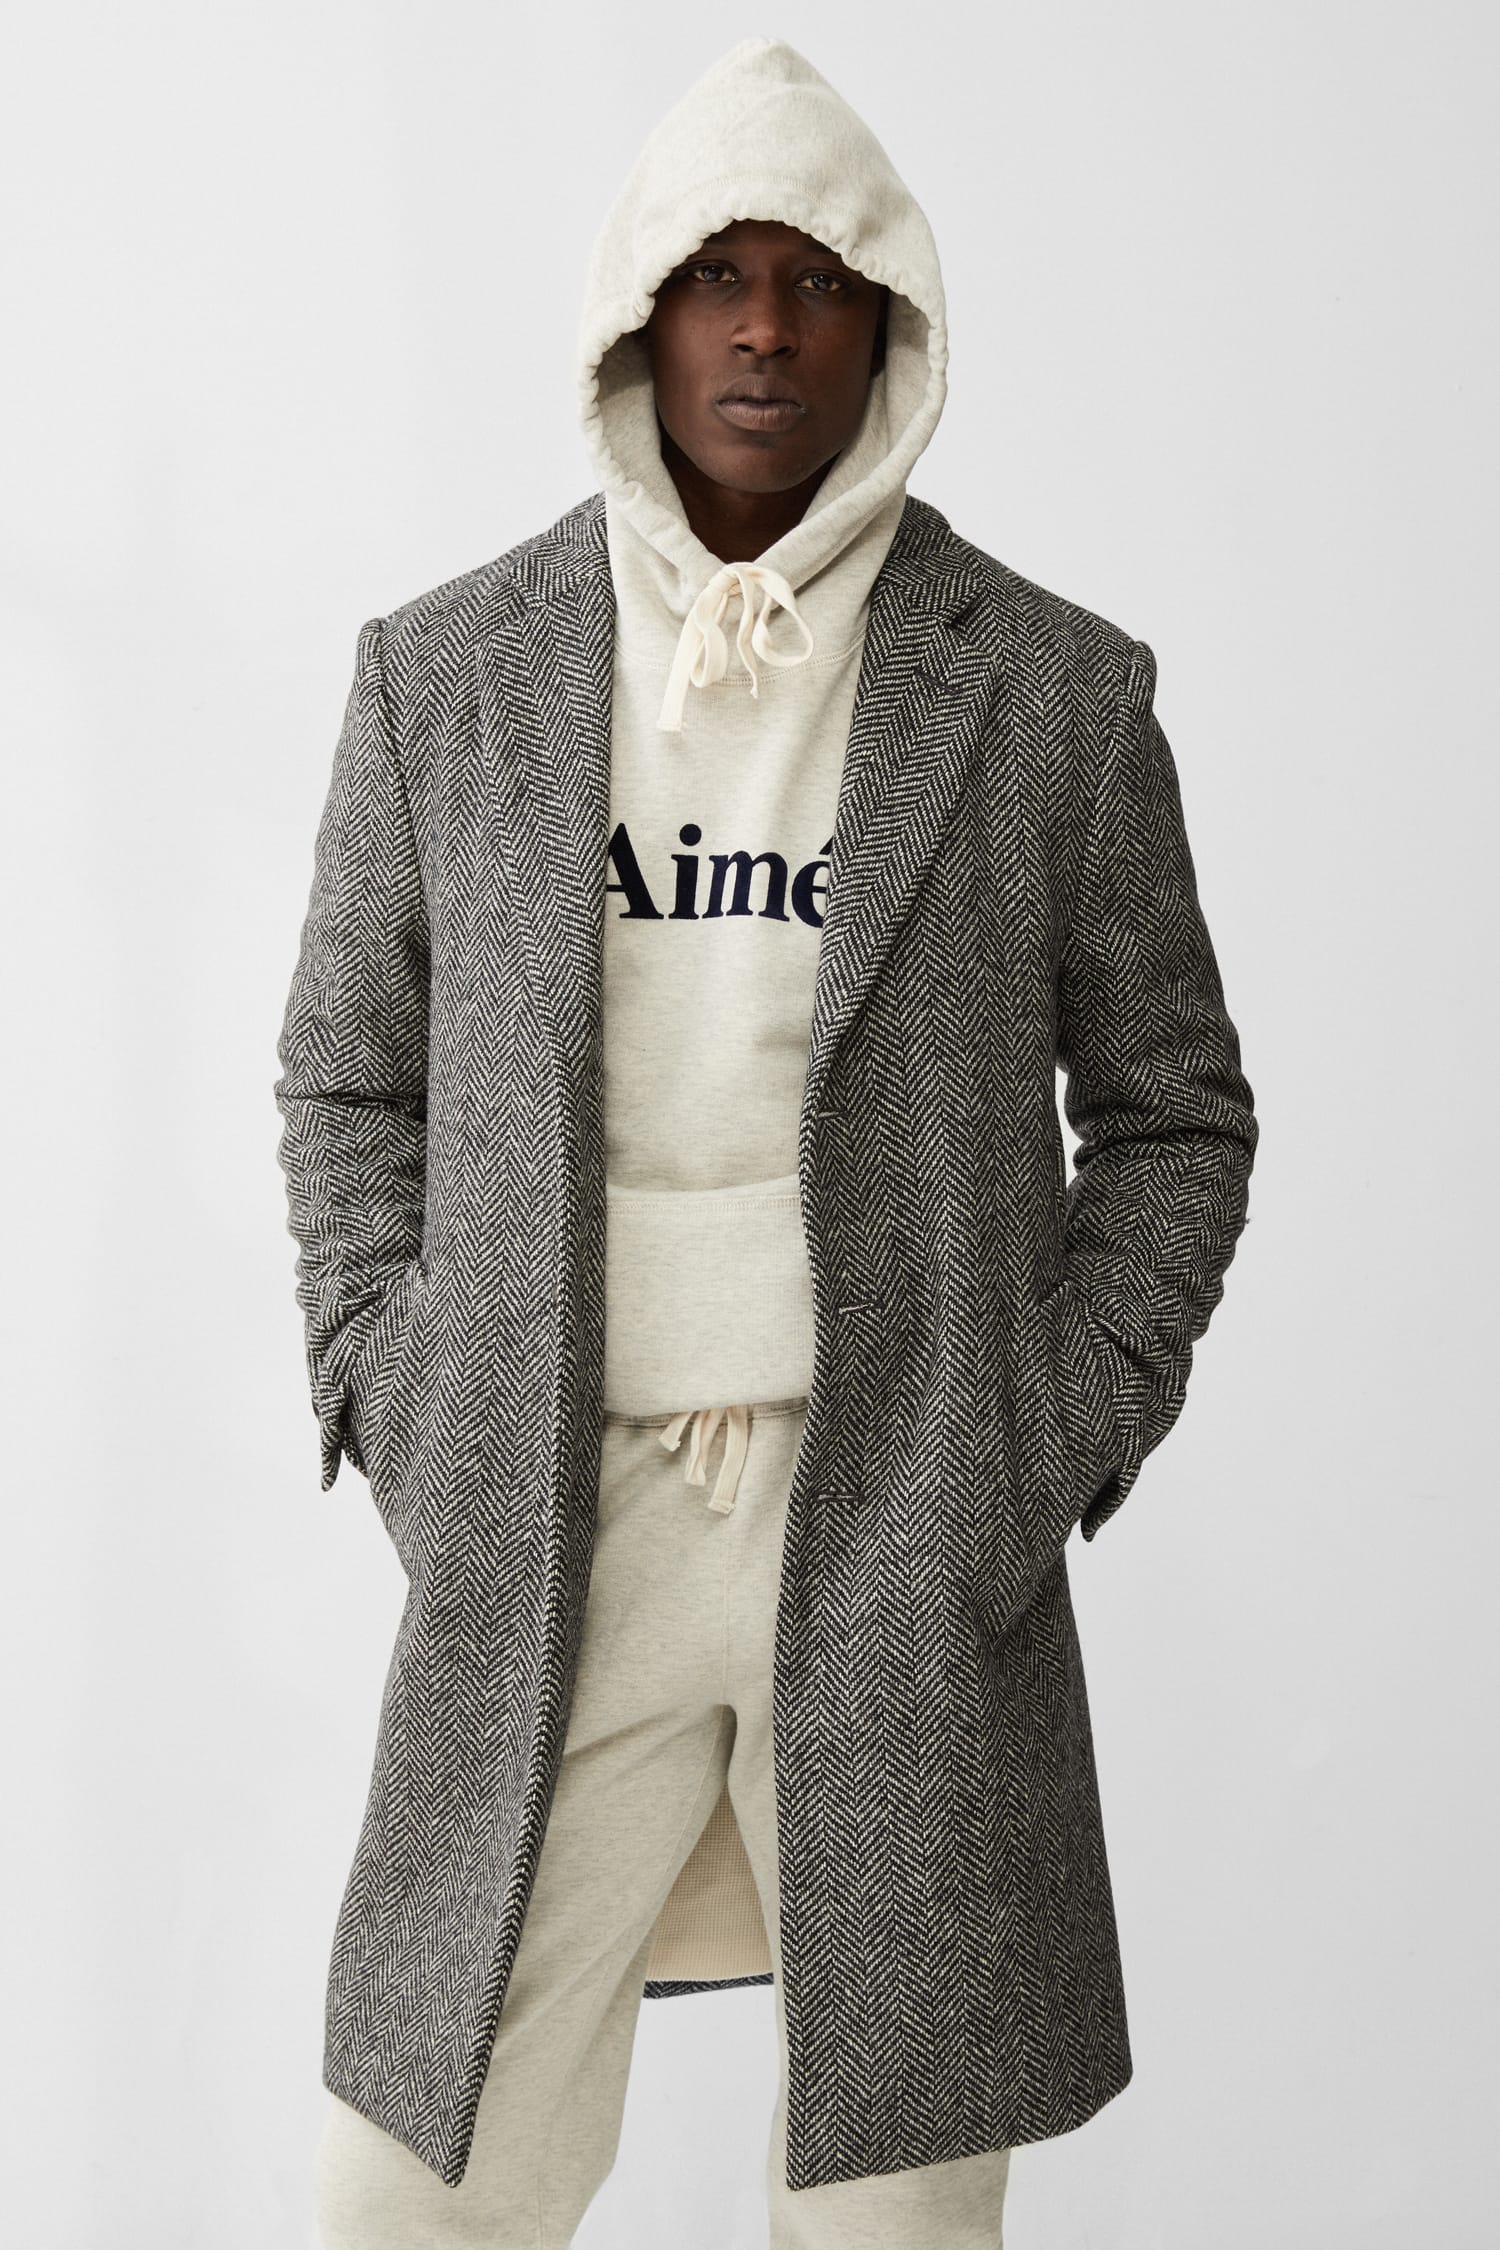 TAKE A LOOK AT THE AIMÉ LEON DORE FW17 COLLECTION - The Drop Date